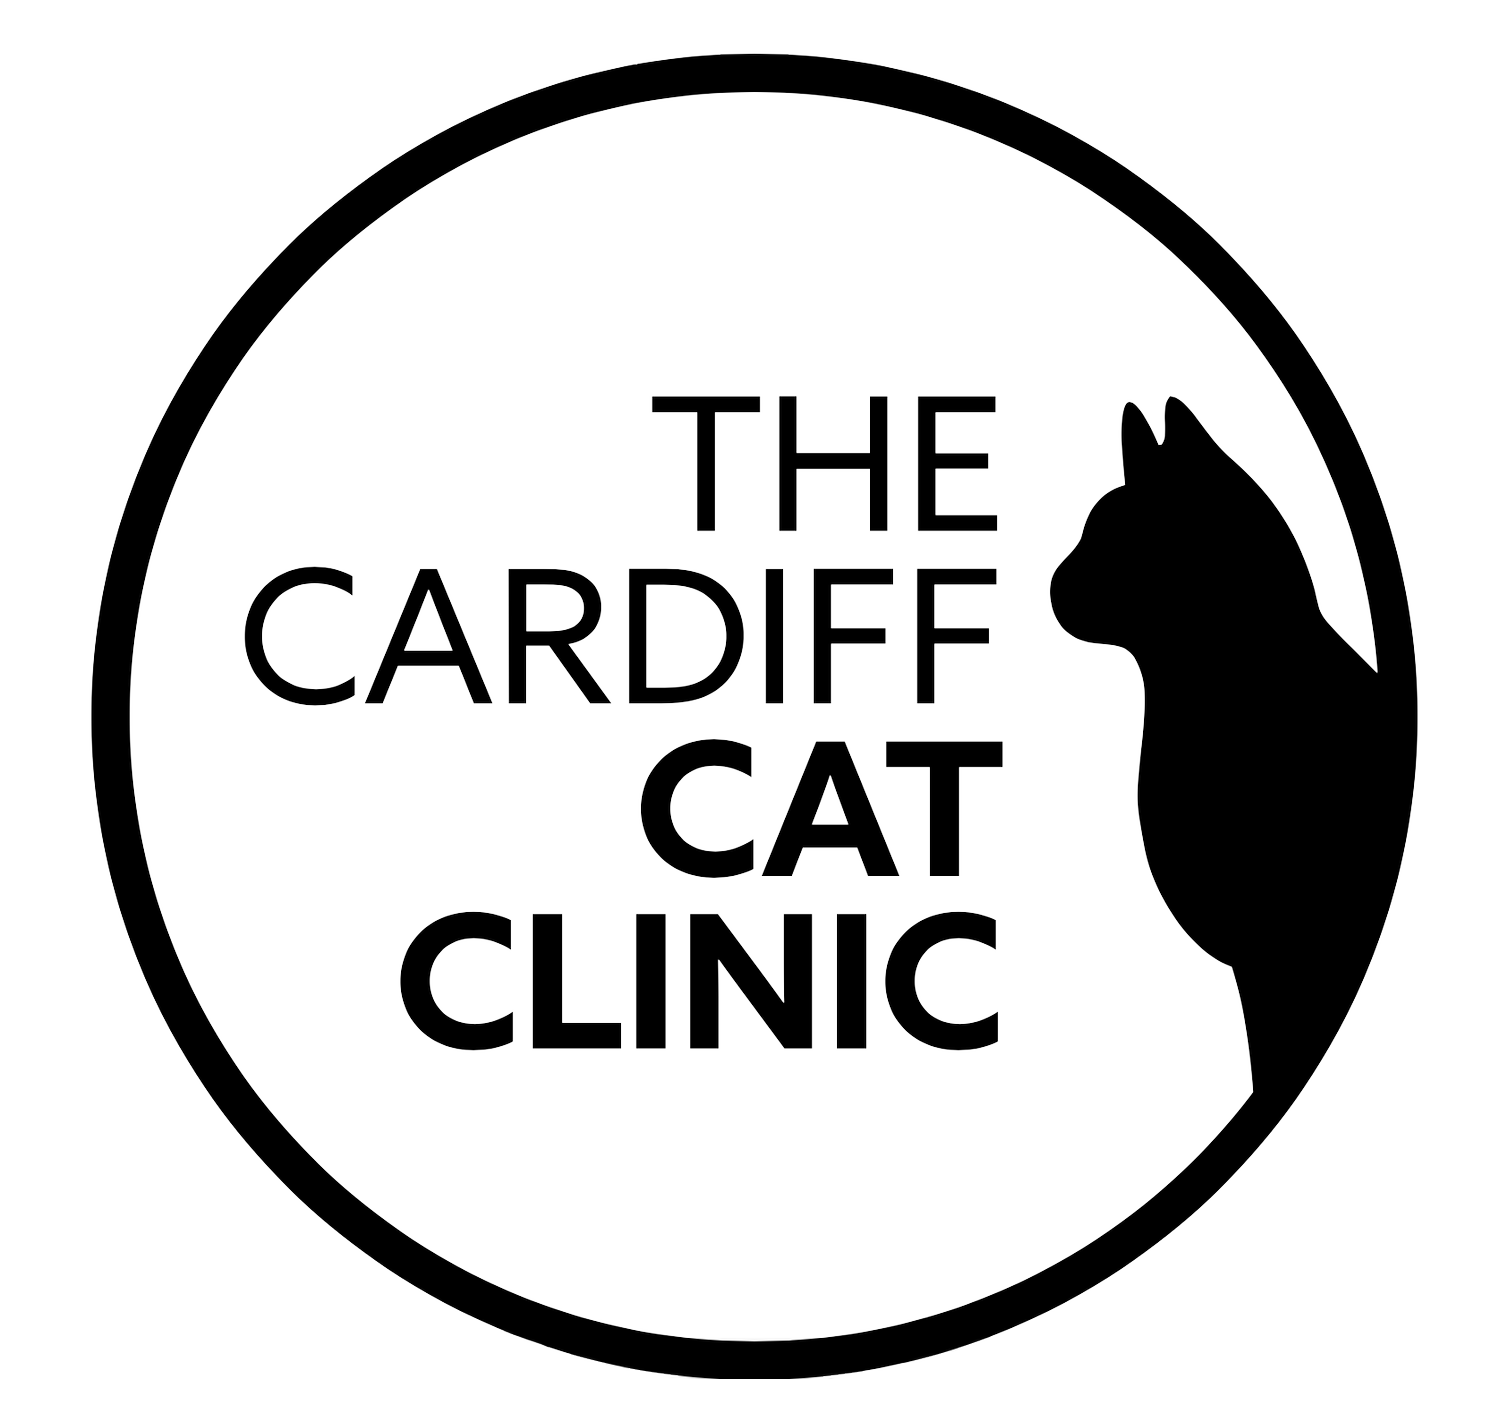 About — The Cardiff Cat Clinic